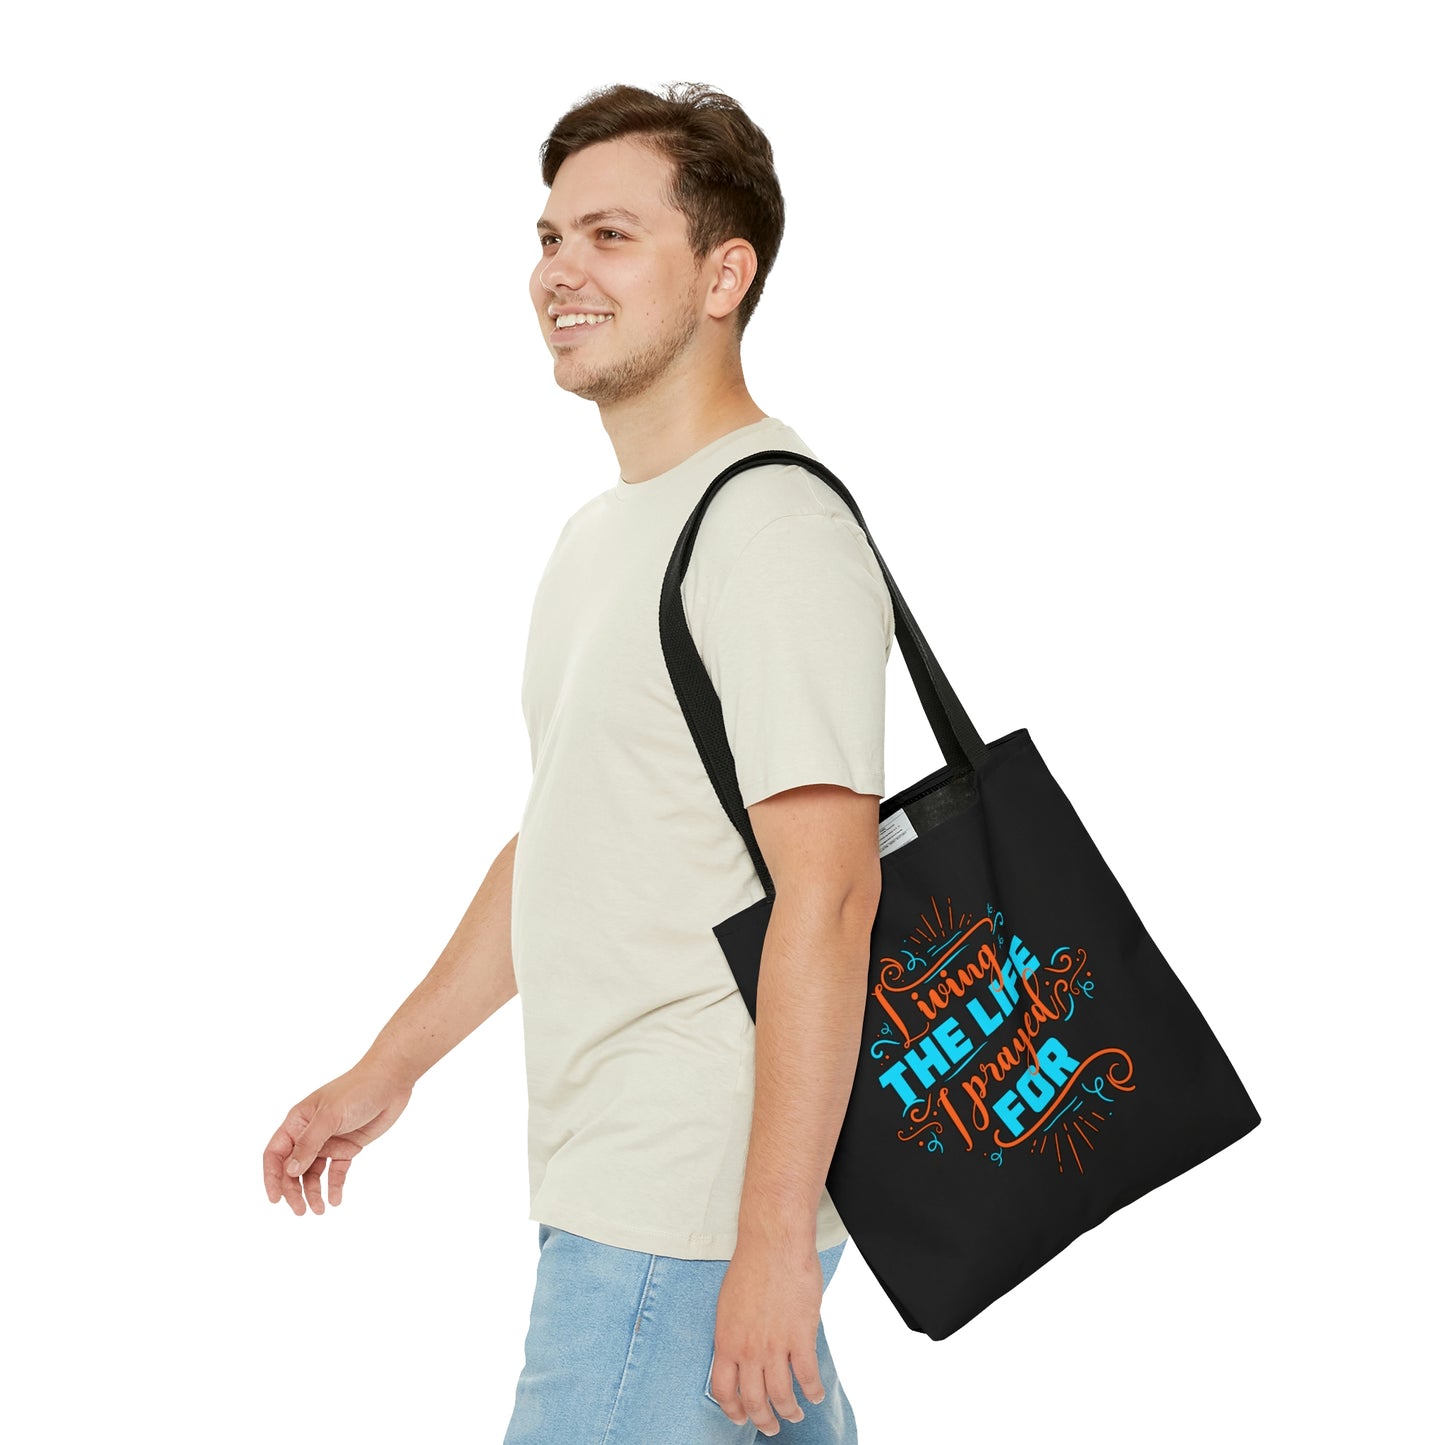 Living The Life I Prayed For Tote Bag